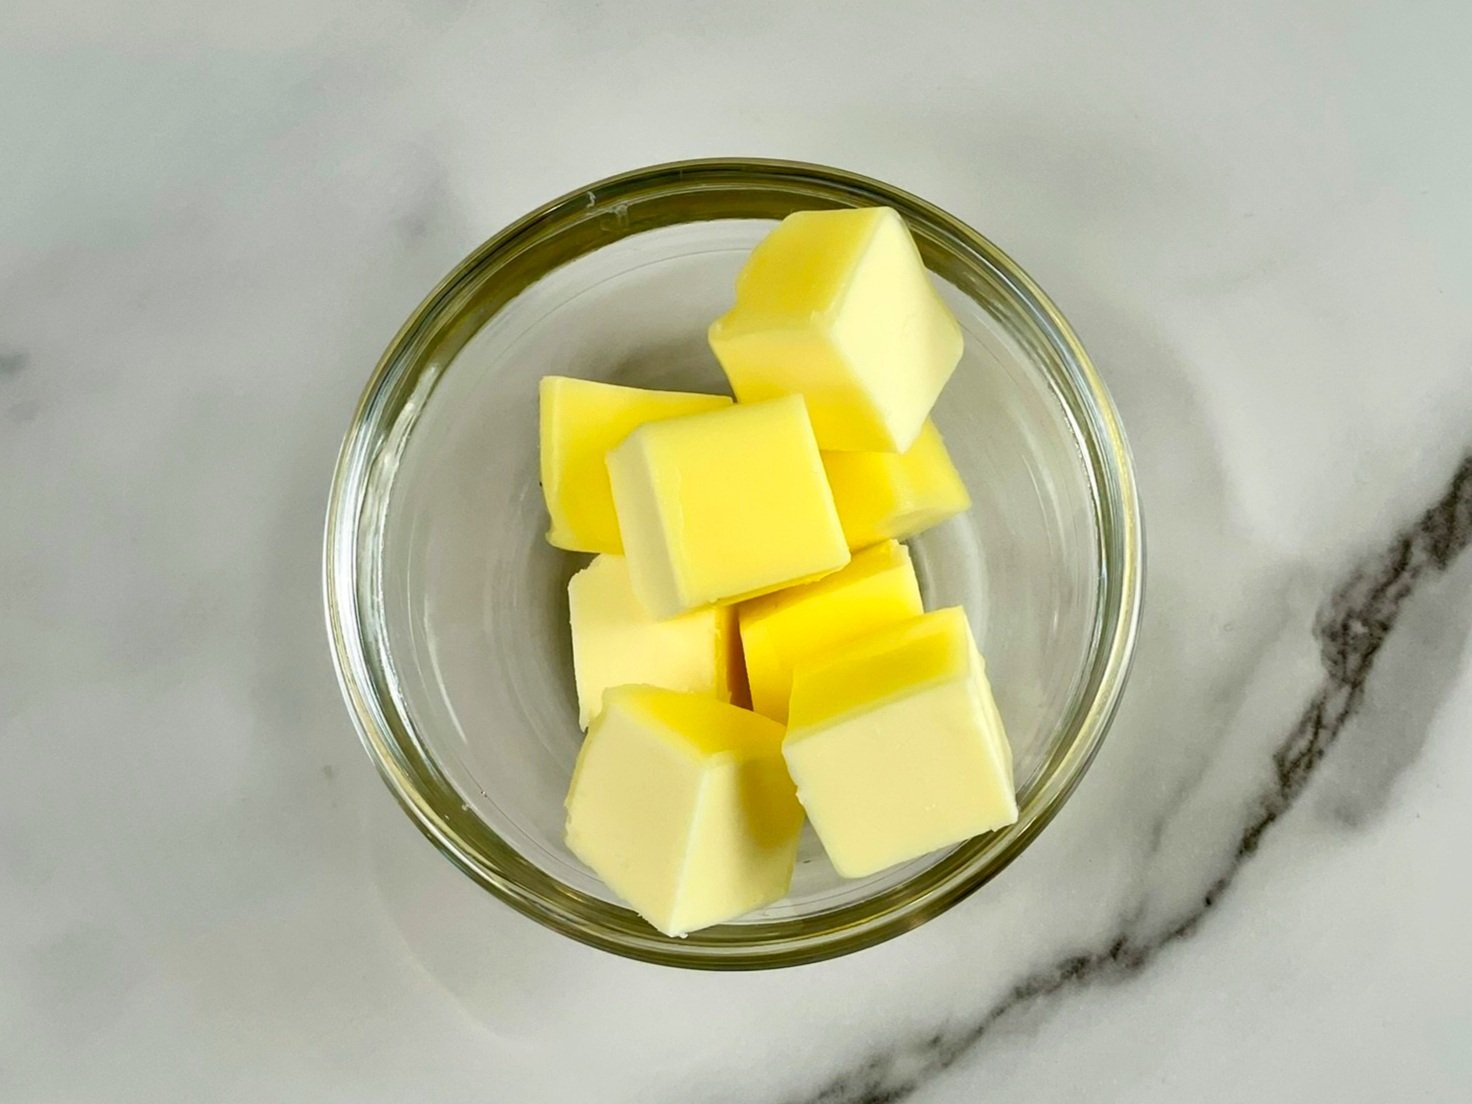 Cubed butter.